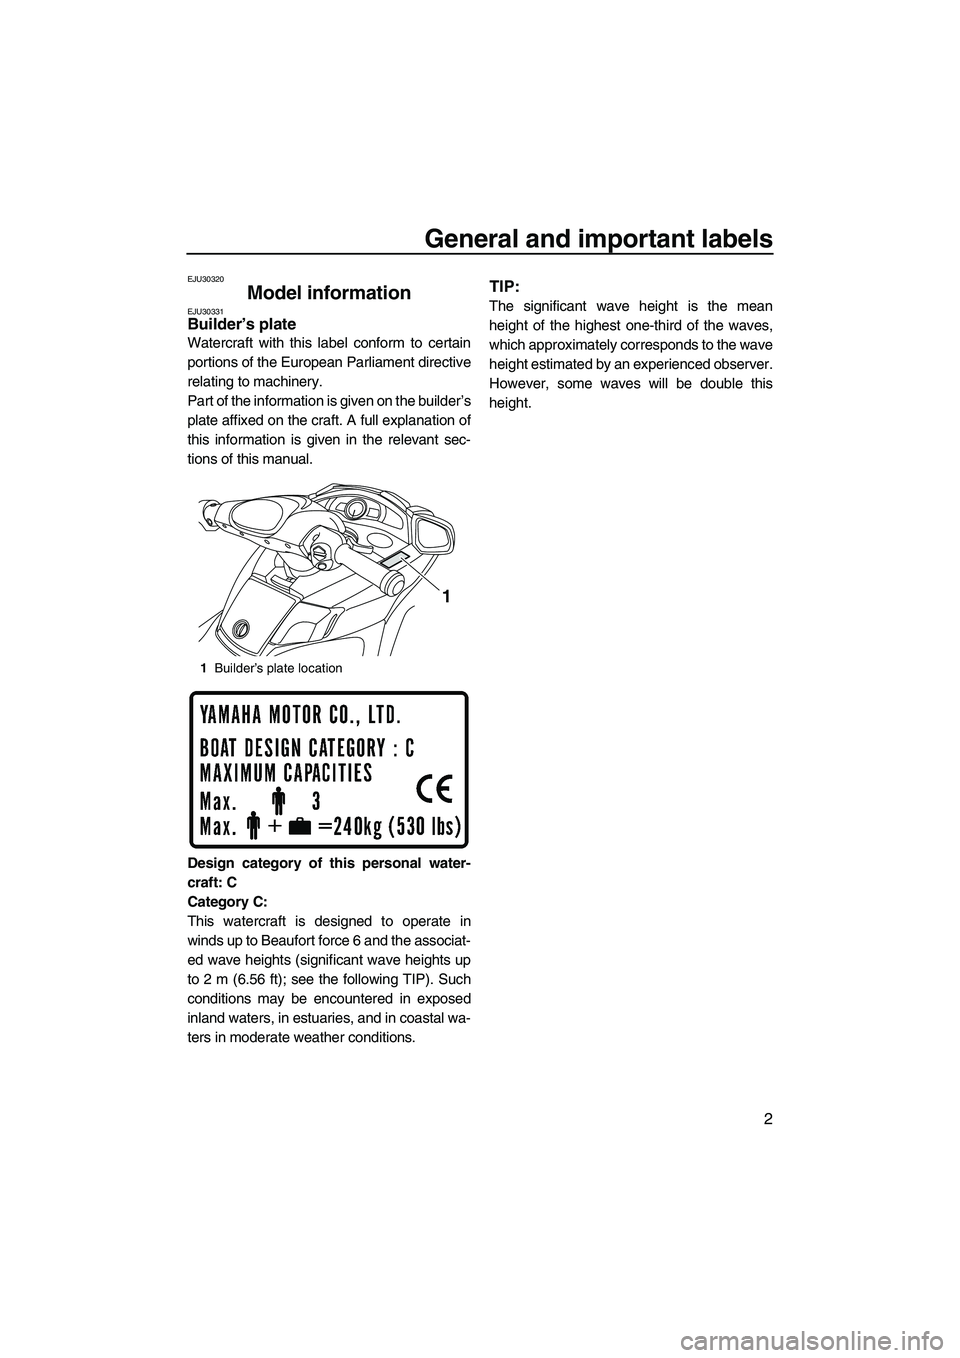 YAMAHA SVHO CRUISER 2010  Owners Manual General and important labels
2
EJU30320
Model information EJU30331Builder’s plate 
Watercraft with this label conform to certain
portions of the European Parliament directive
relating to machinery.
